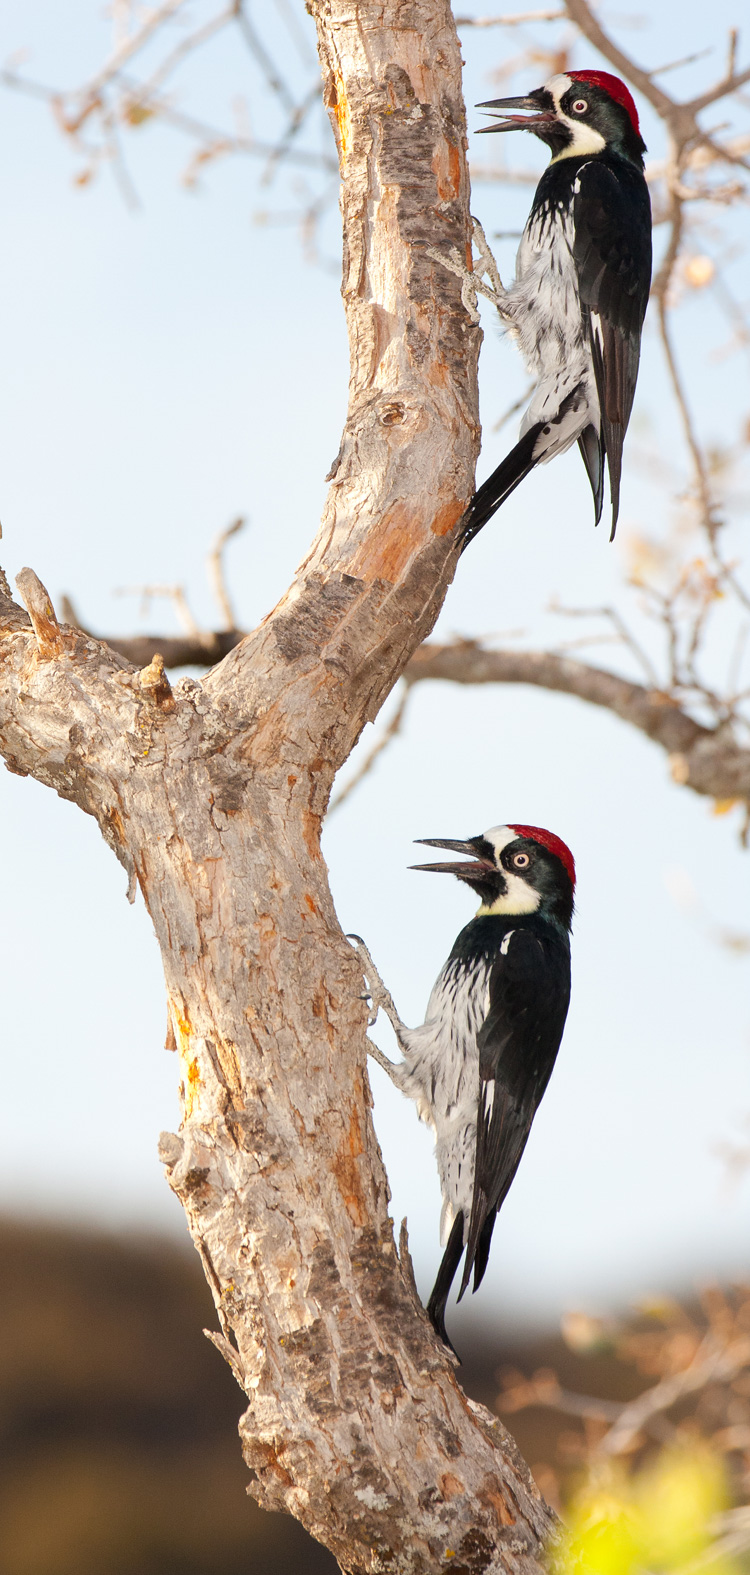 Two male or juvenile acorn woodpeckers - note there's no black band on forehead. (Photo by Richard Ingles)